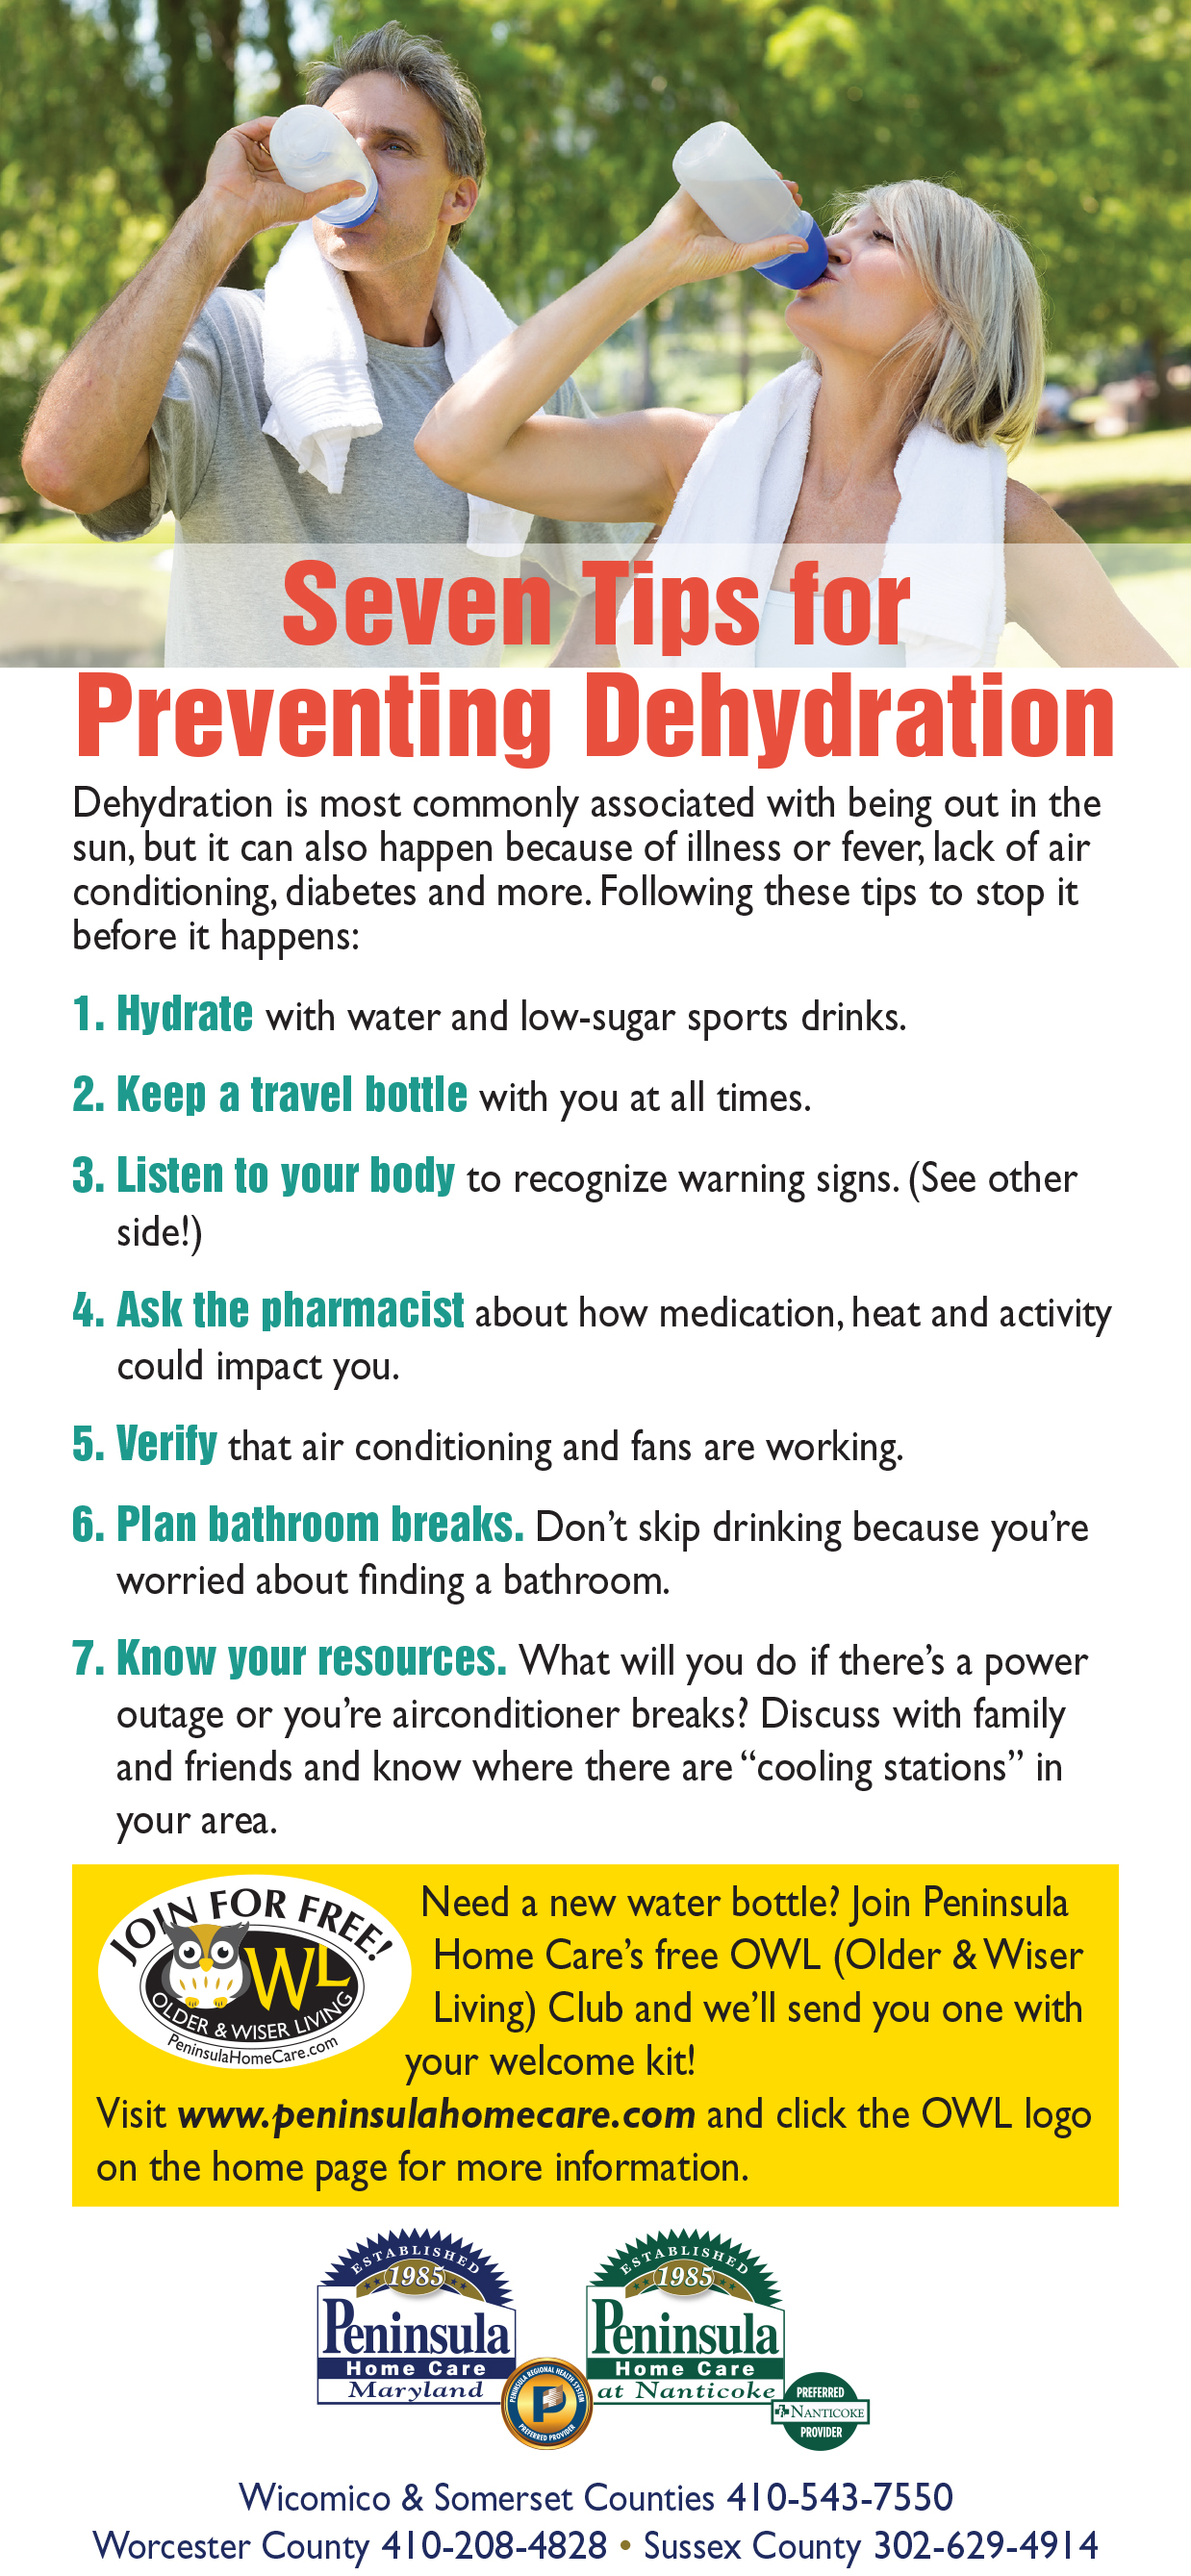 Seven Tips for Preventing Dehydration - Infographic by Peninsula Home Care